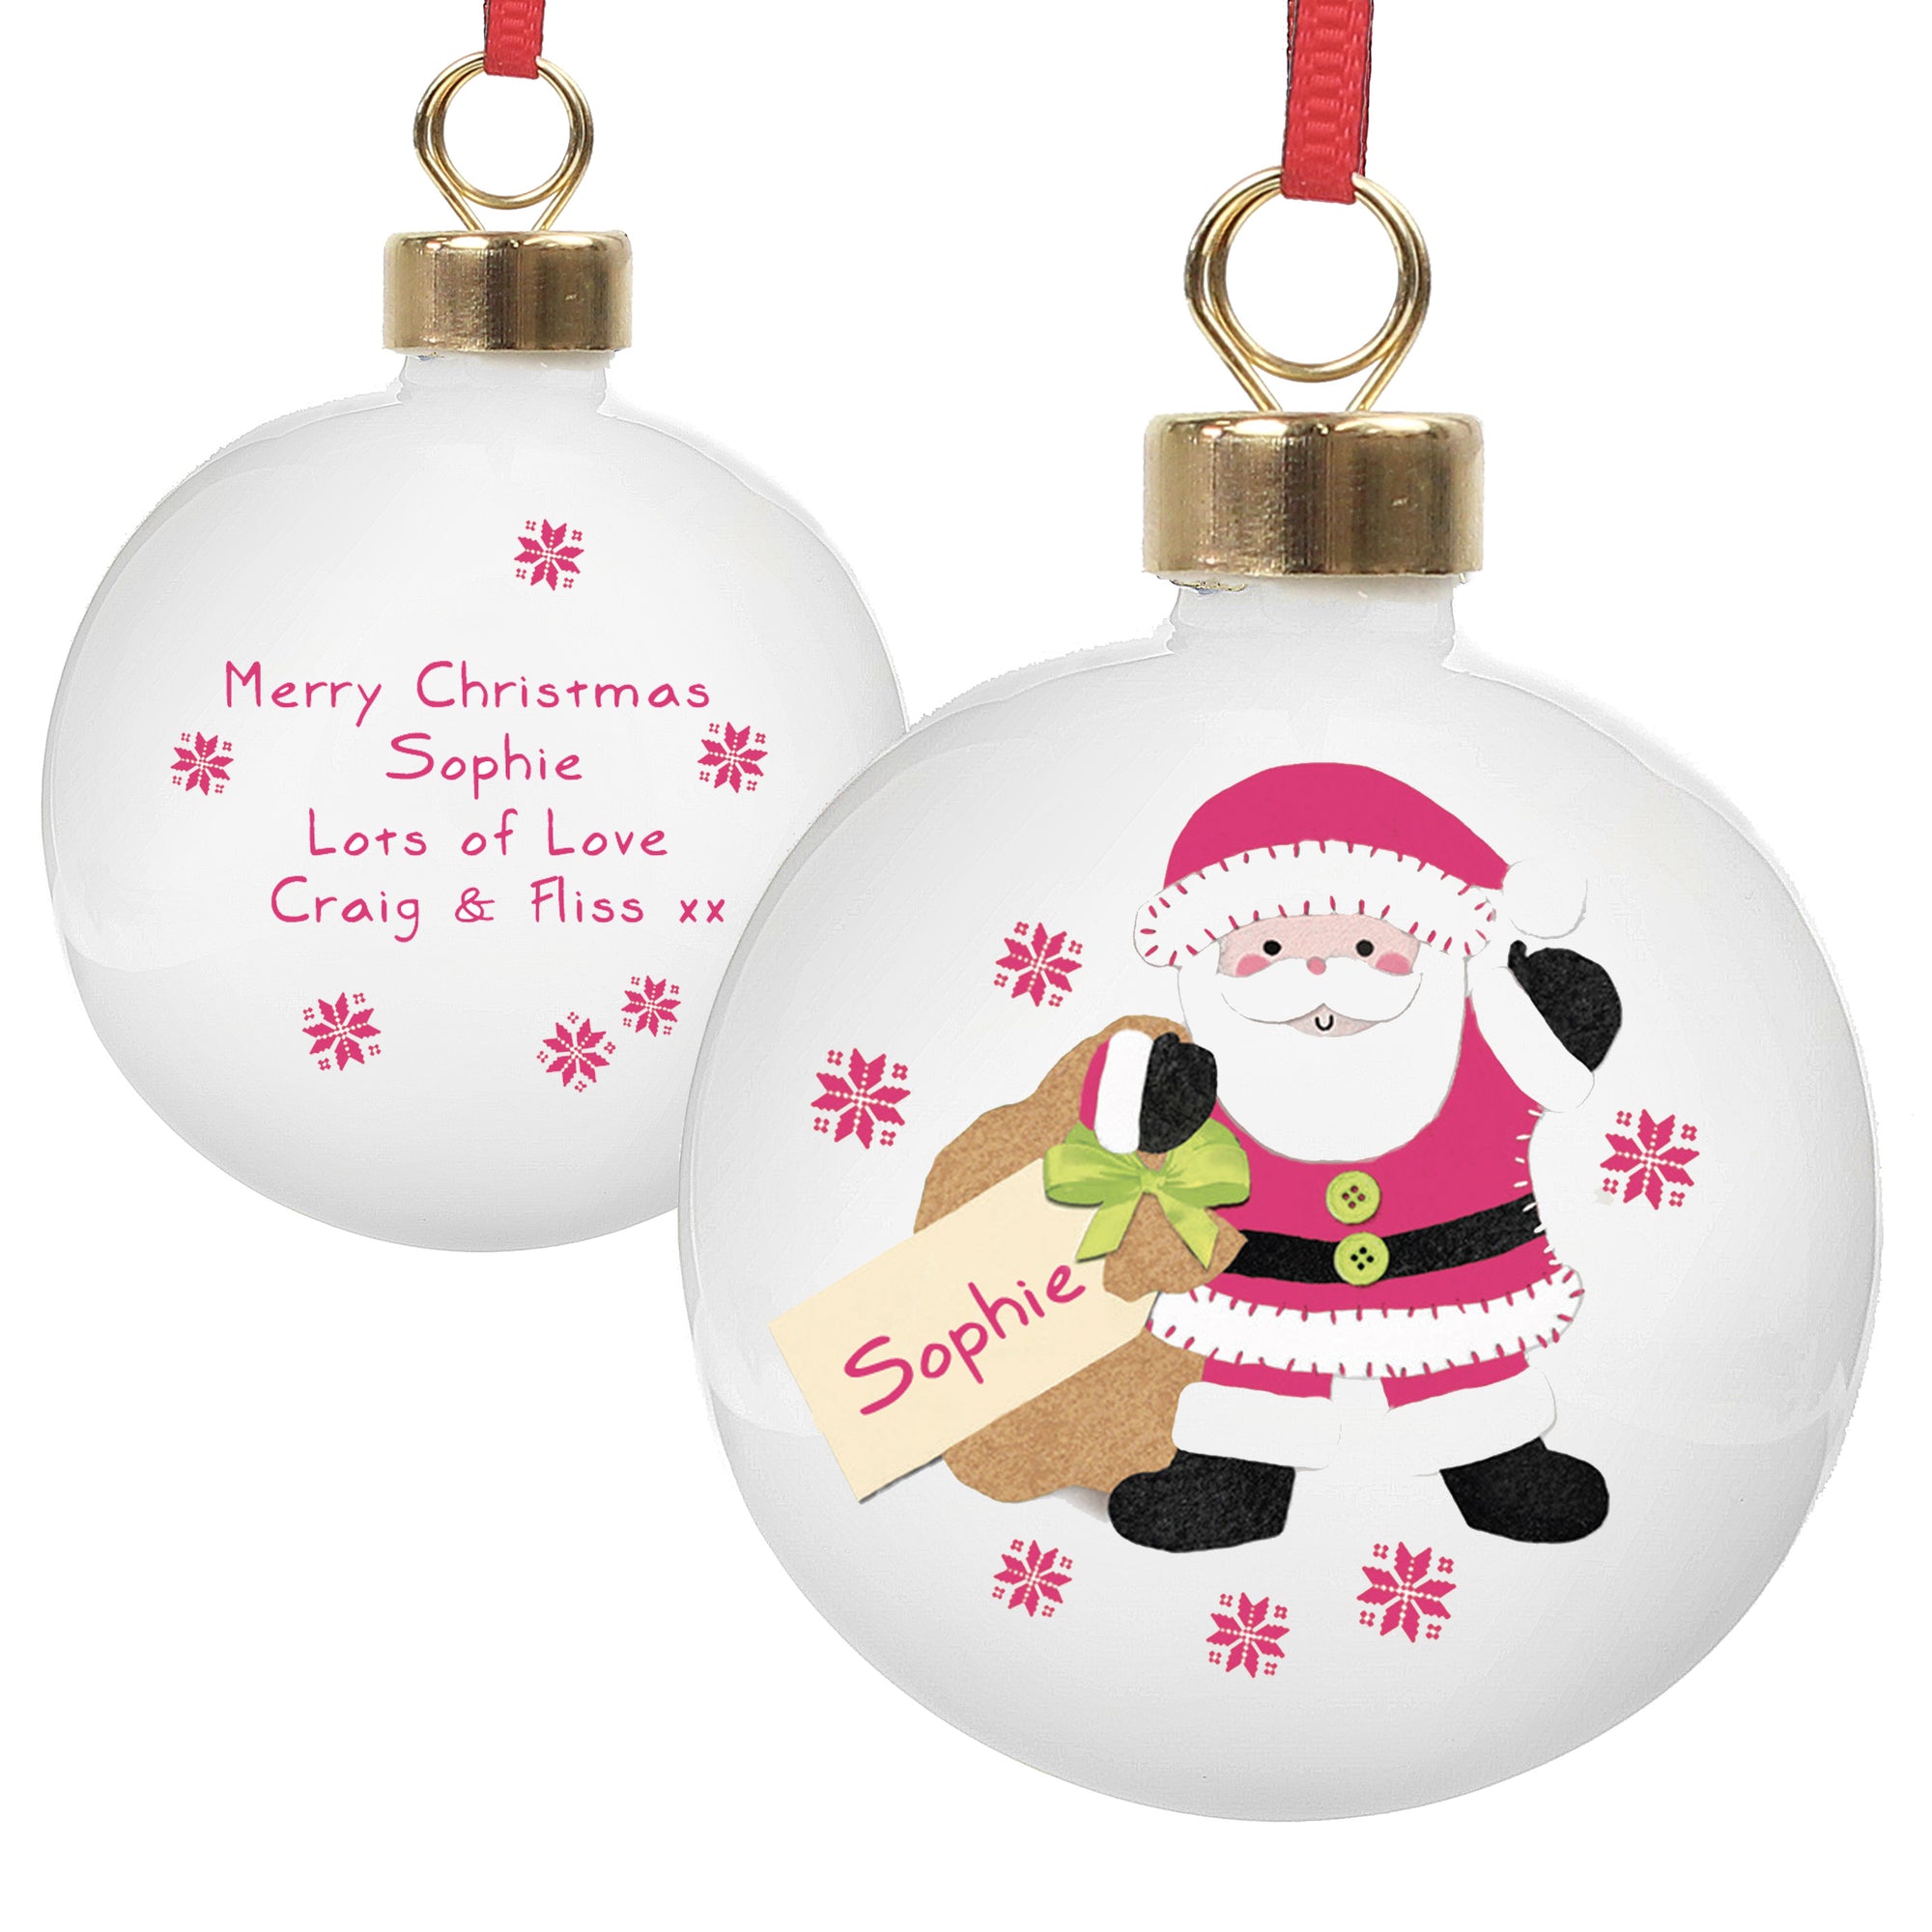 Personalised white ceramic Christmas tree bauble featuring a hand-drawn image of Santa holding a present sack. The front of the bauble can be personalised with a name which will be printed within the label of the sack that Santa is holding and the rear of the bauble can be personalised with your own message over up to 4 lines.